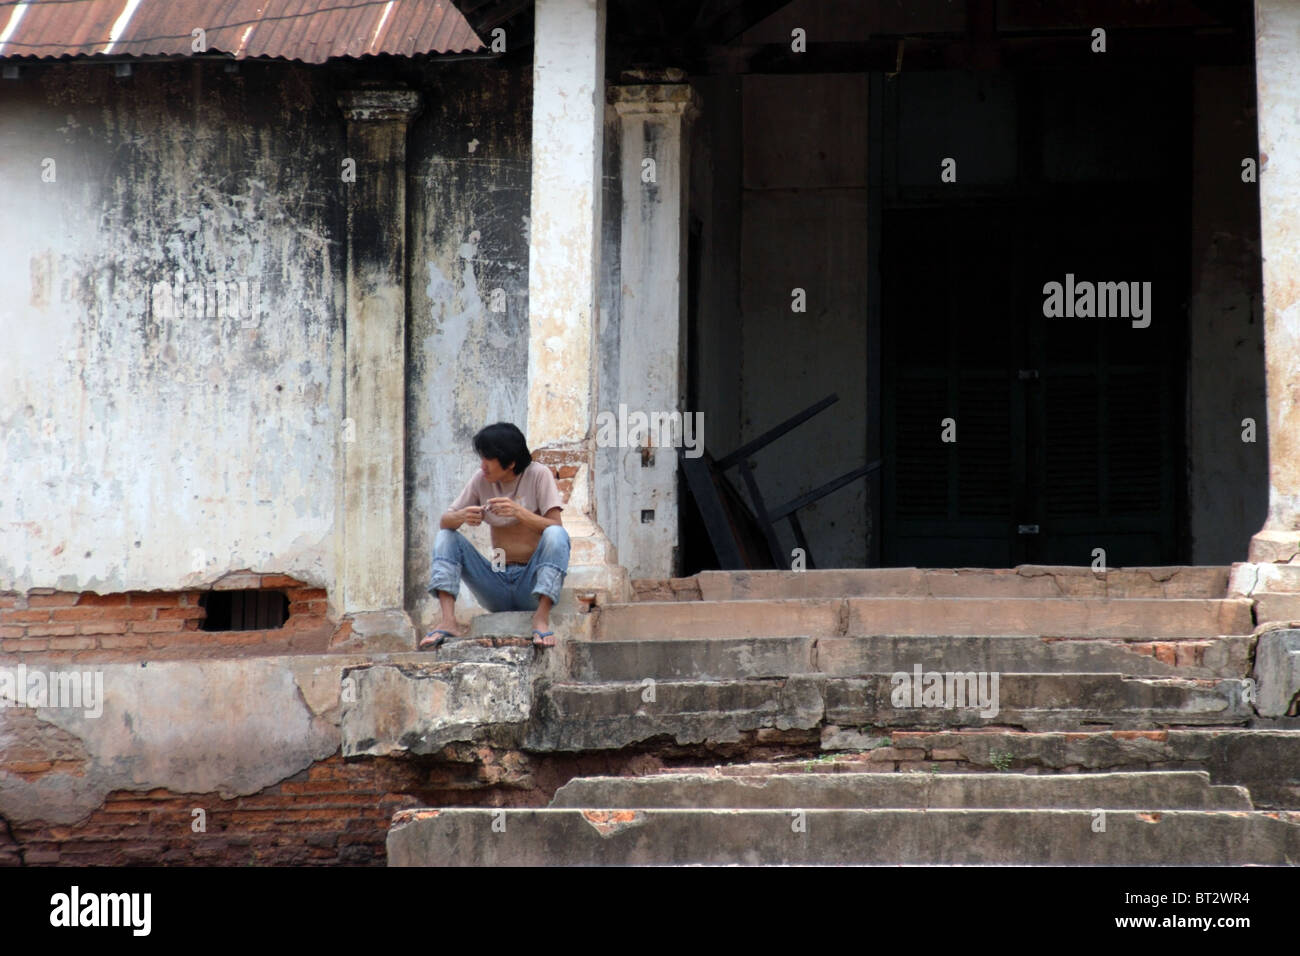 A young man is sitting on the steps of a dilapidated old building in communist Laos. Stock Photo